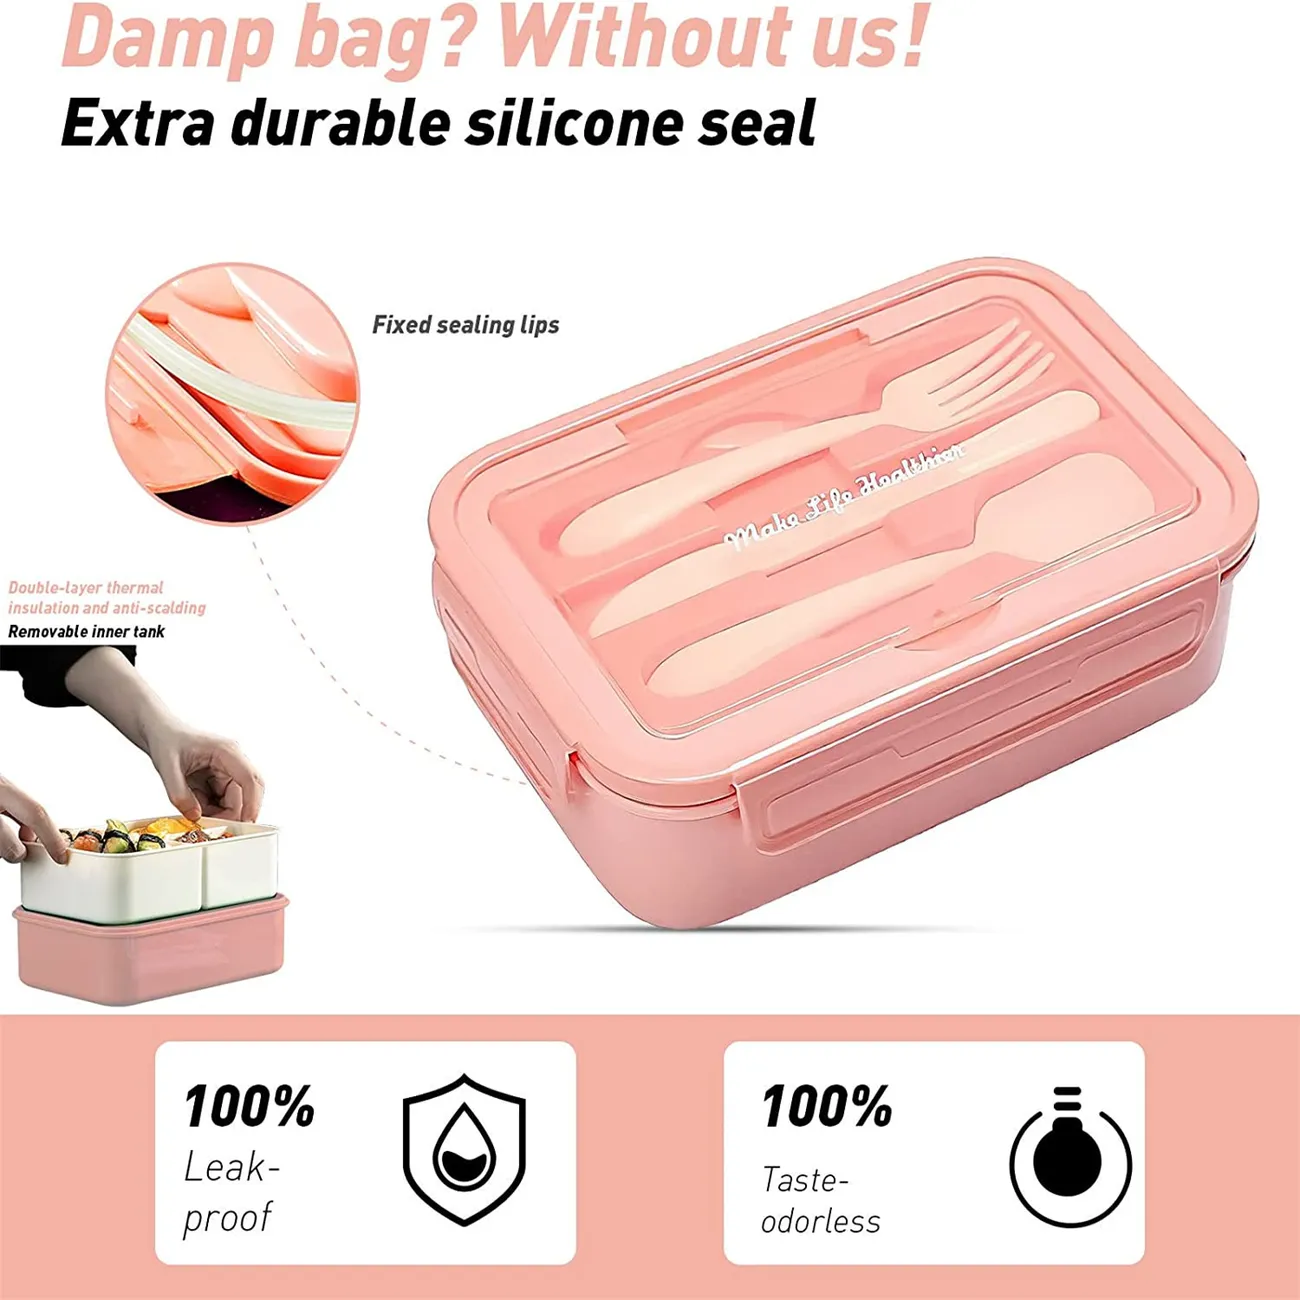 Student Sub-grid Bento Box Toddler or Kid's Fruit Lunch Box Office Workers  Microwave Heating Lunch Box